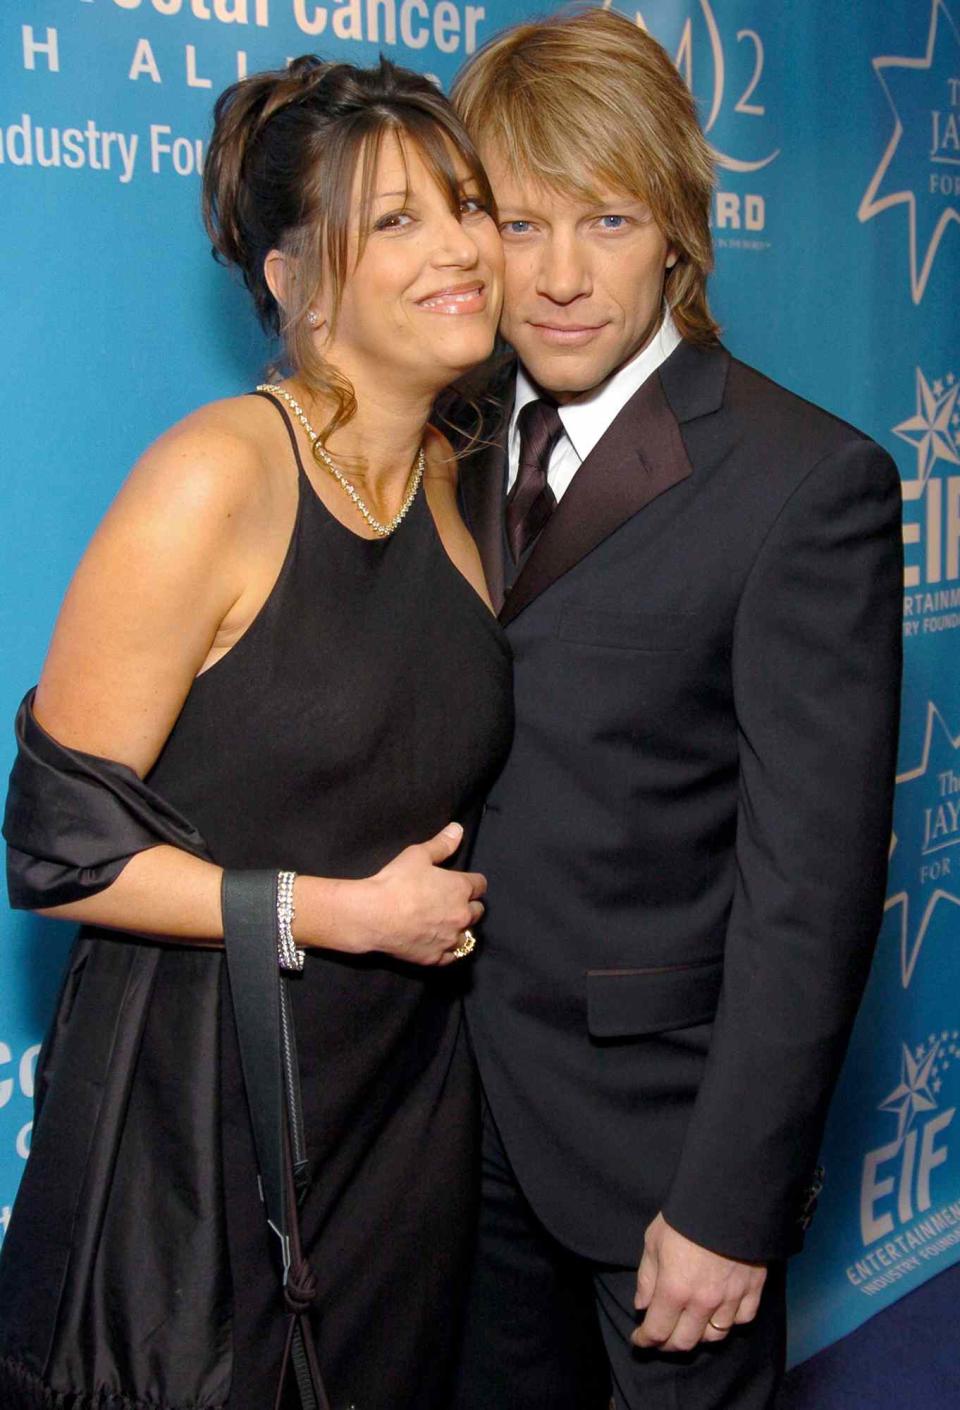 Dorothea Hurley and Jon Bon Jovi during Entertainment Industry Foundation's Colon Cancer Benefit on the QM2 - Red Carpet at Queen Mary 2 in New York City, New York, United States